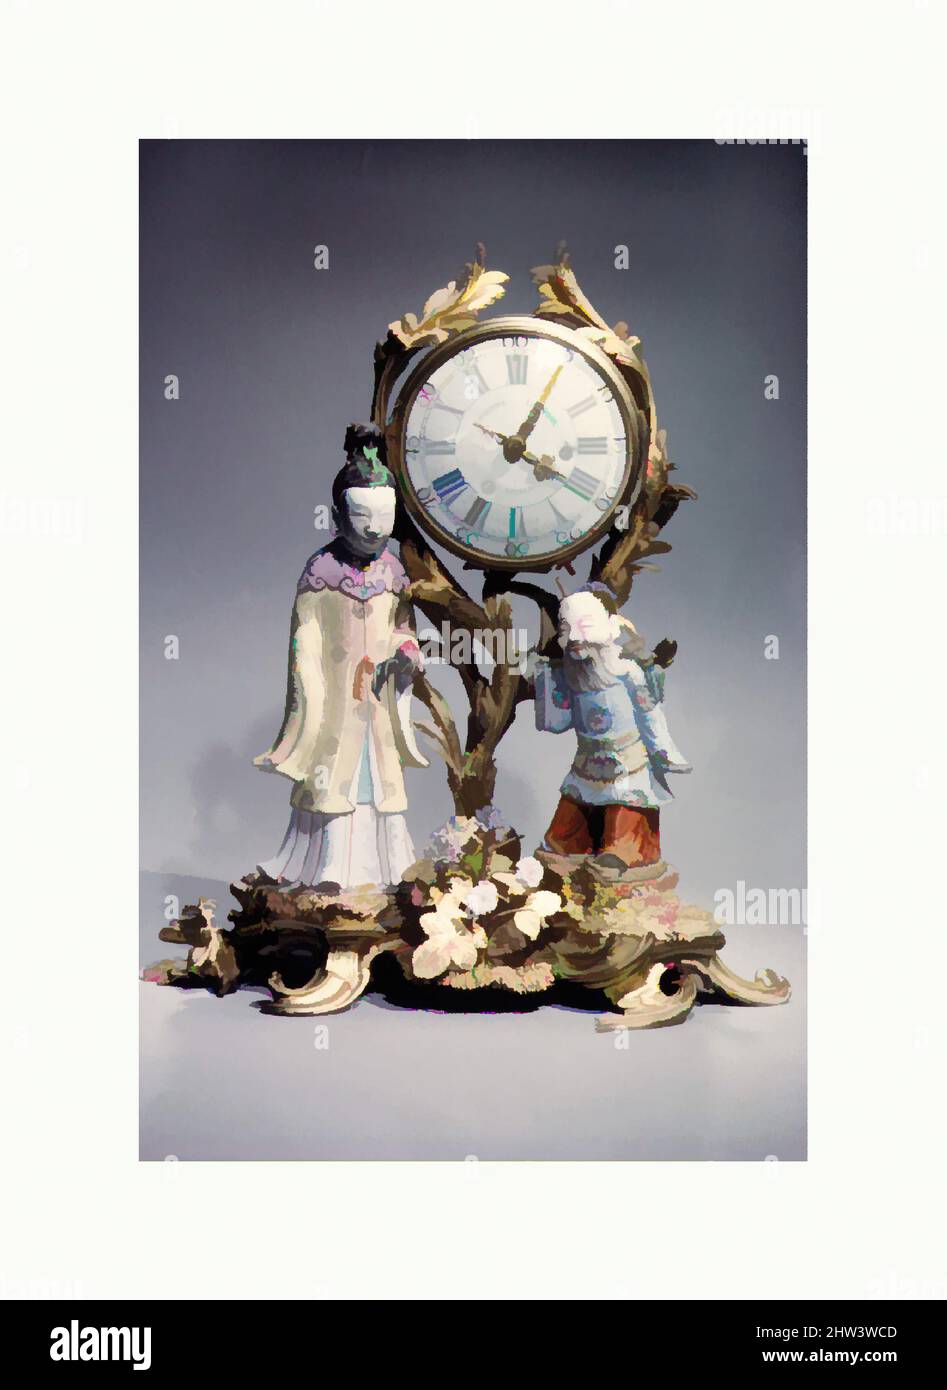 Art inspired by Mantel clock, Clockmaker: Étienne I Le Noir (French, 1675–1739), ca. 1745–49, French, Paris, Gilt bronze, porcelain, Overall: 17 3/16 × 14 3/4 × 8 in. (43.7 × 37.5 × 20.3 cm), Horology, Clockmaker: Étienne I Le Noir (French, 1675–1739, Classic works modernized by Artotop with a splash of modernity. Shapes, color and value, eye-catching visual impact on art. Emotions through freedom of artworks in a contemporary way. A timeless message pursuing a wildly creative new direction. Artists turning to the digital medium and creating the Artotop NFT Stock Photo